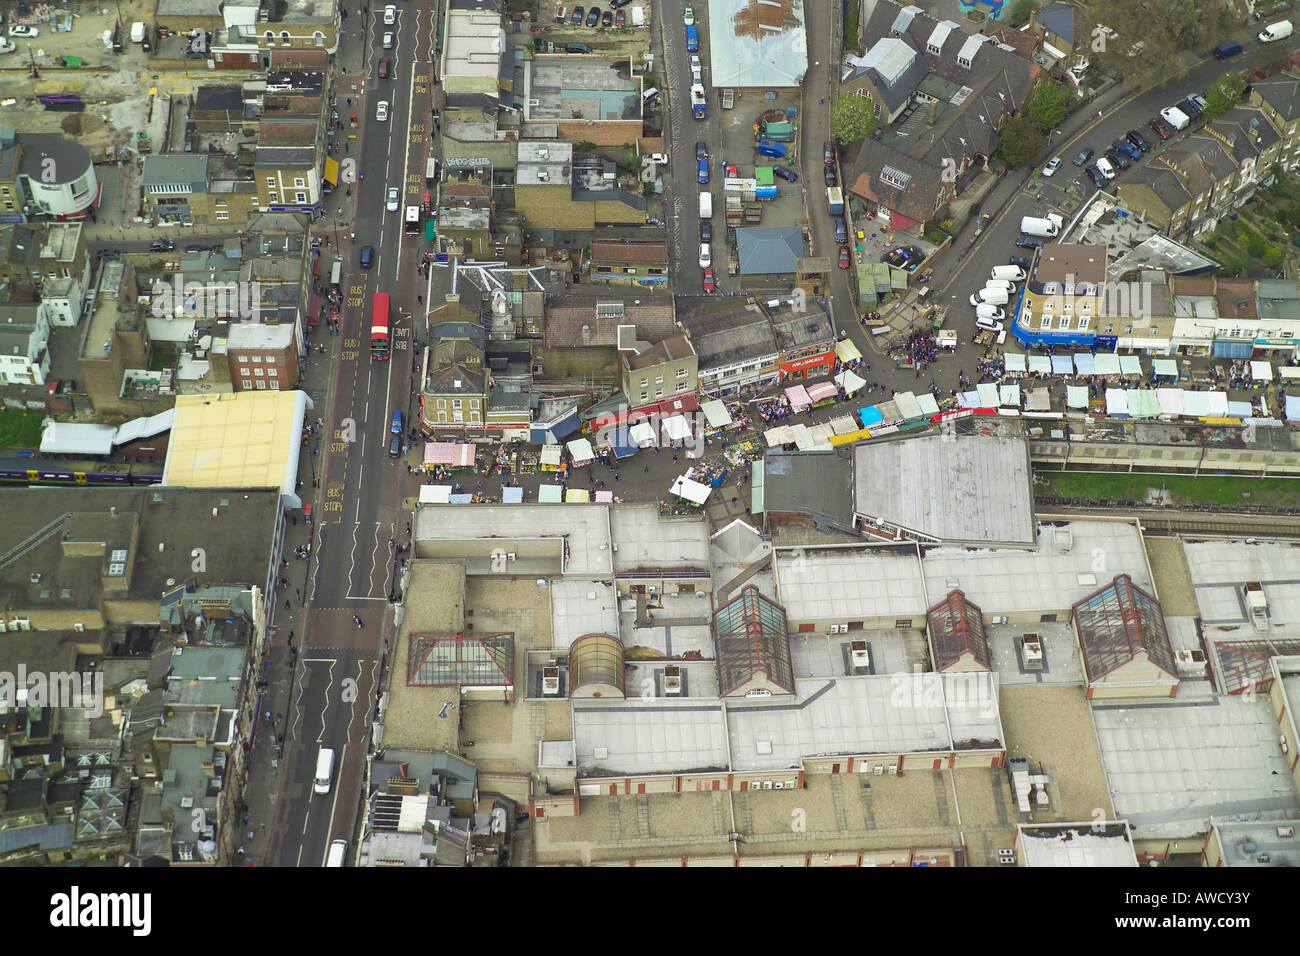 Aerial view of the Ridley Road Street Market in Dalston in East London which is also known as Dalston Market Stock Photo